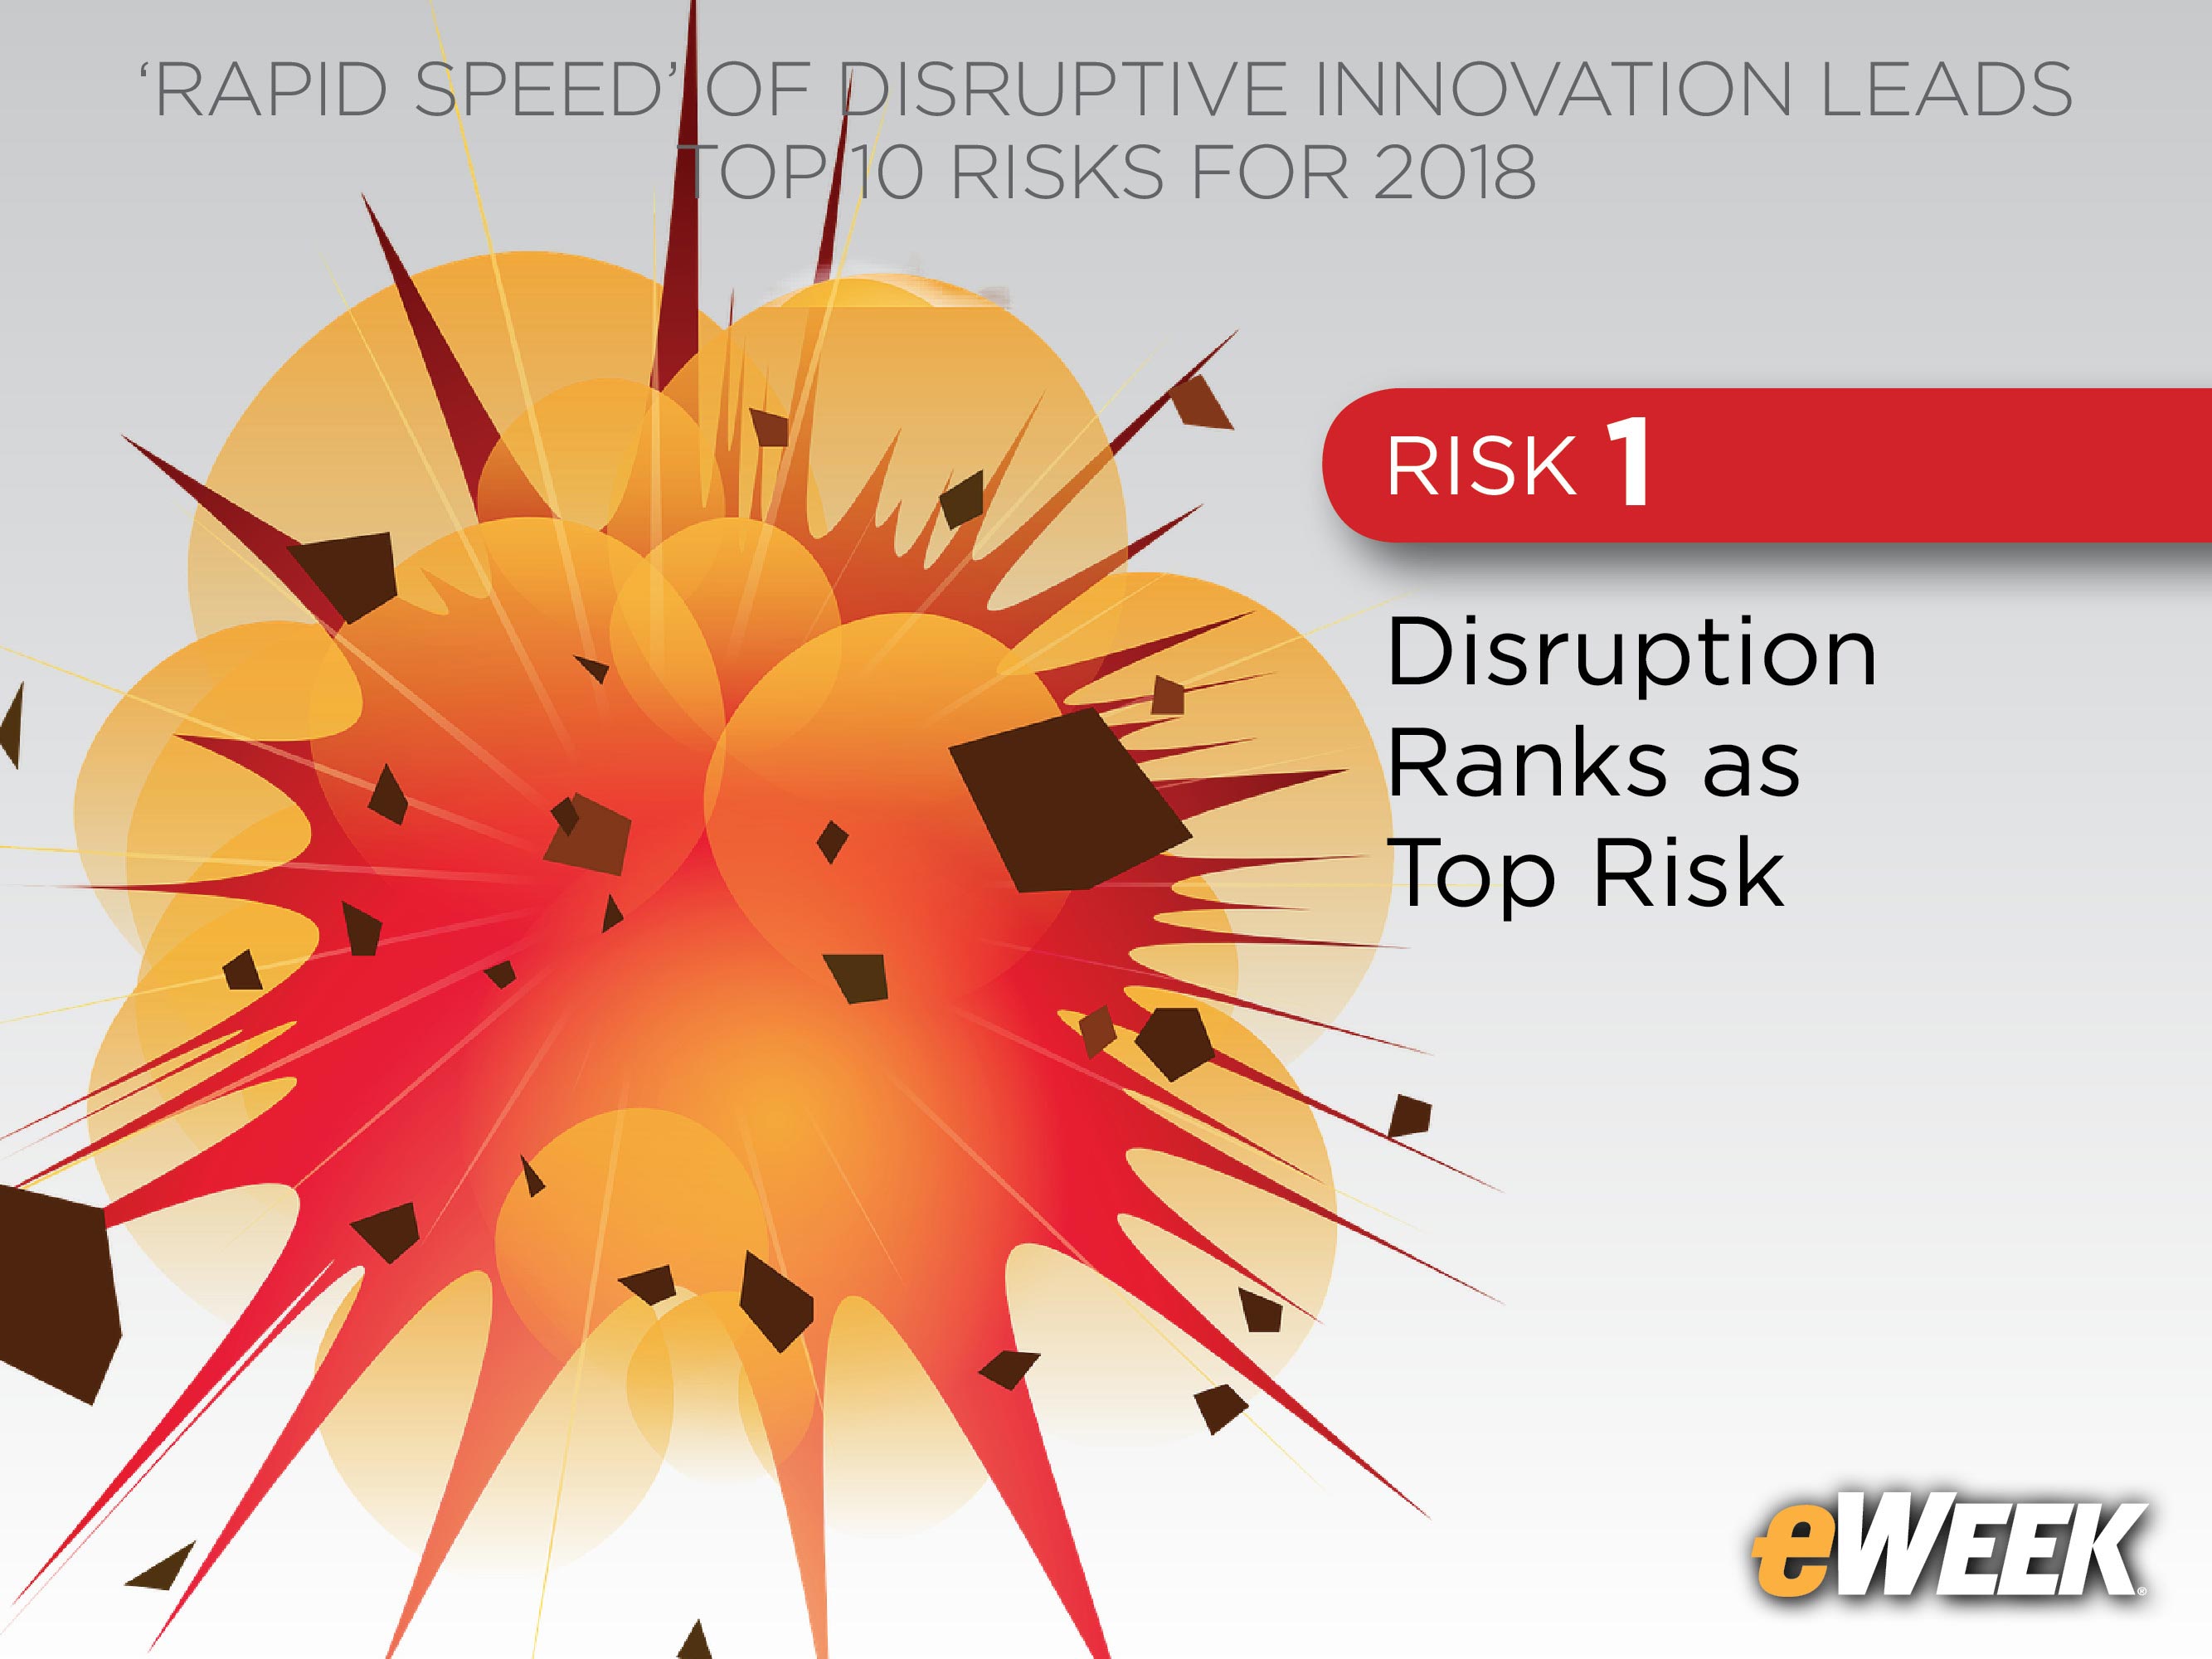 Disruption Ranks as Top Risk